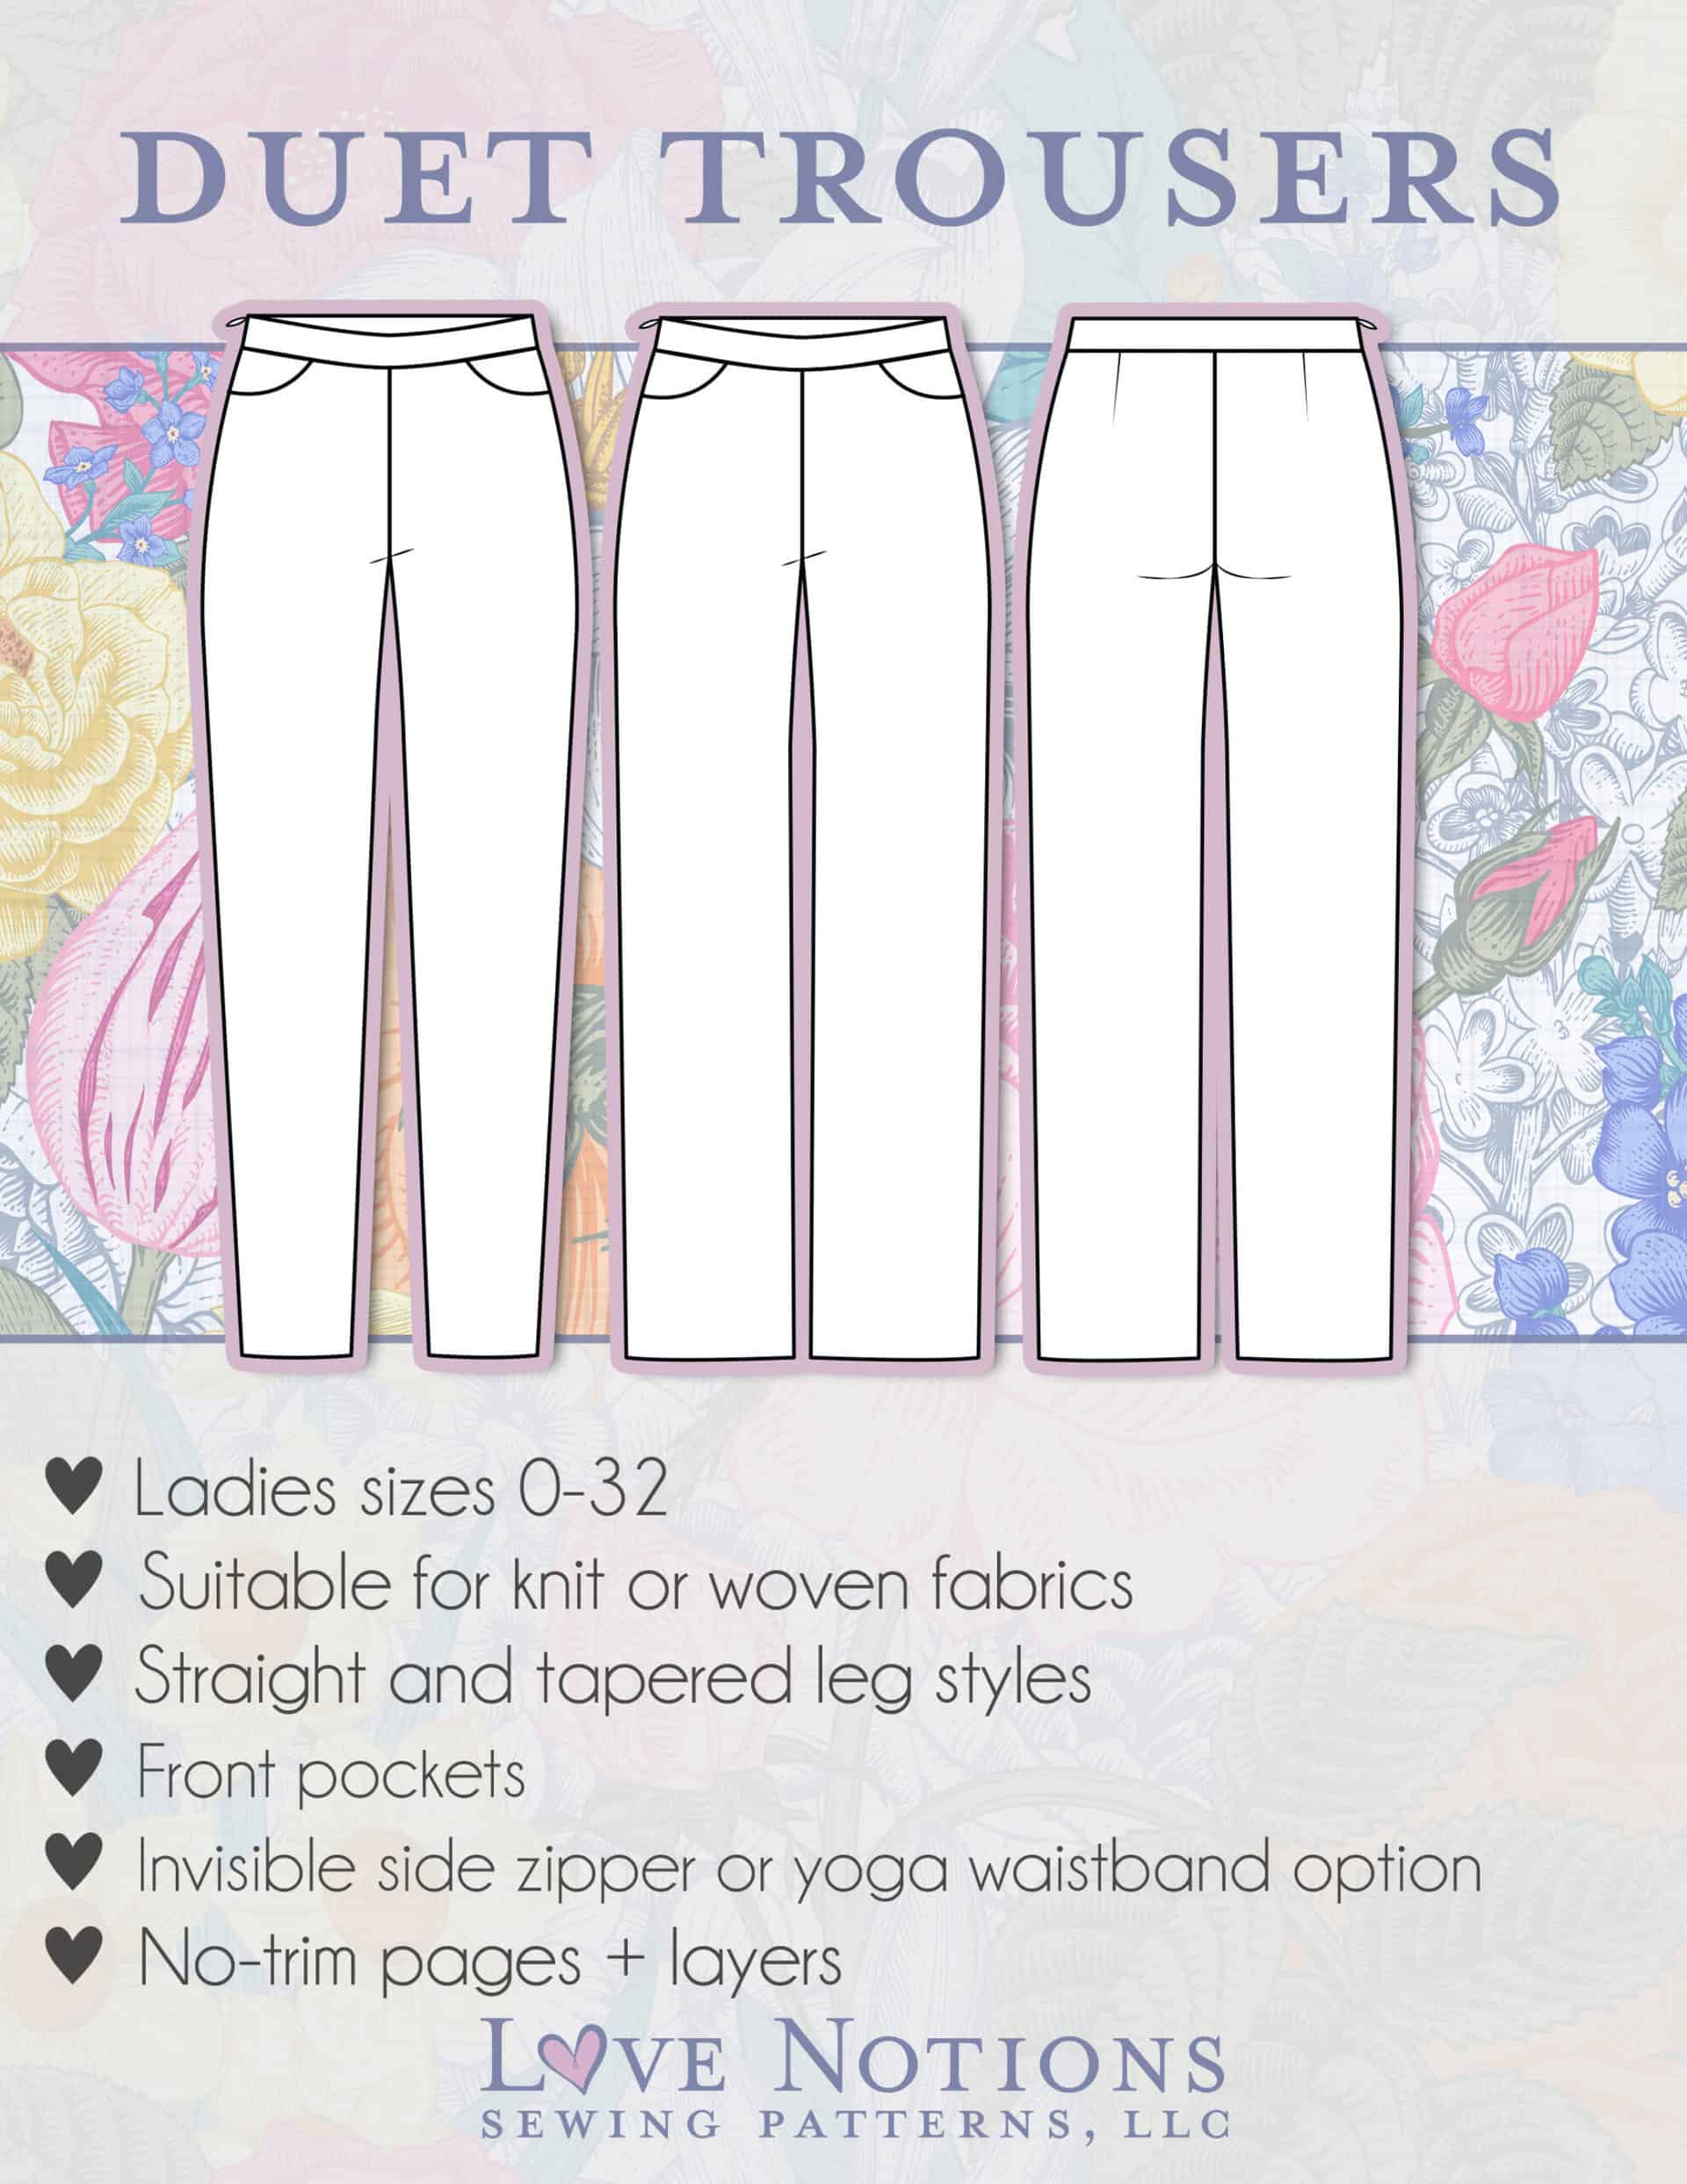 Duet Trousers pdf pattern for ladies by Love Notions Sewing Patterns, LLC